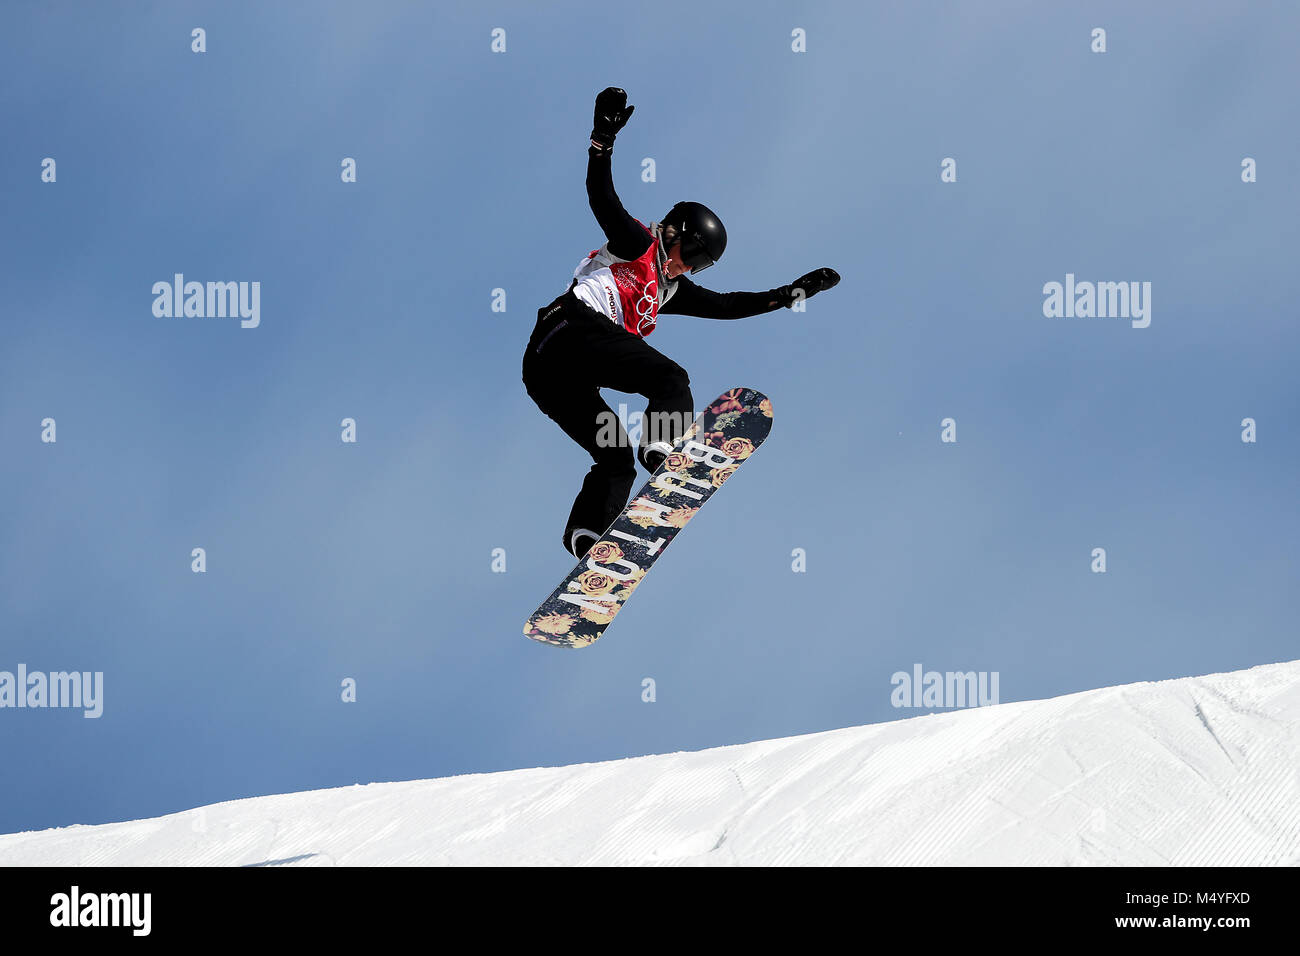 Switzerland's Sina Candrian in the Ladies Snowboarding Big Air at the Alpensia Ski Jumping Centre during day ten of the PyeongChang 2018 Winter Olympic Games in South Korea. Stock Photo